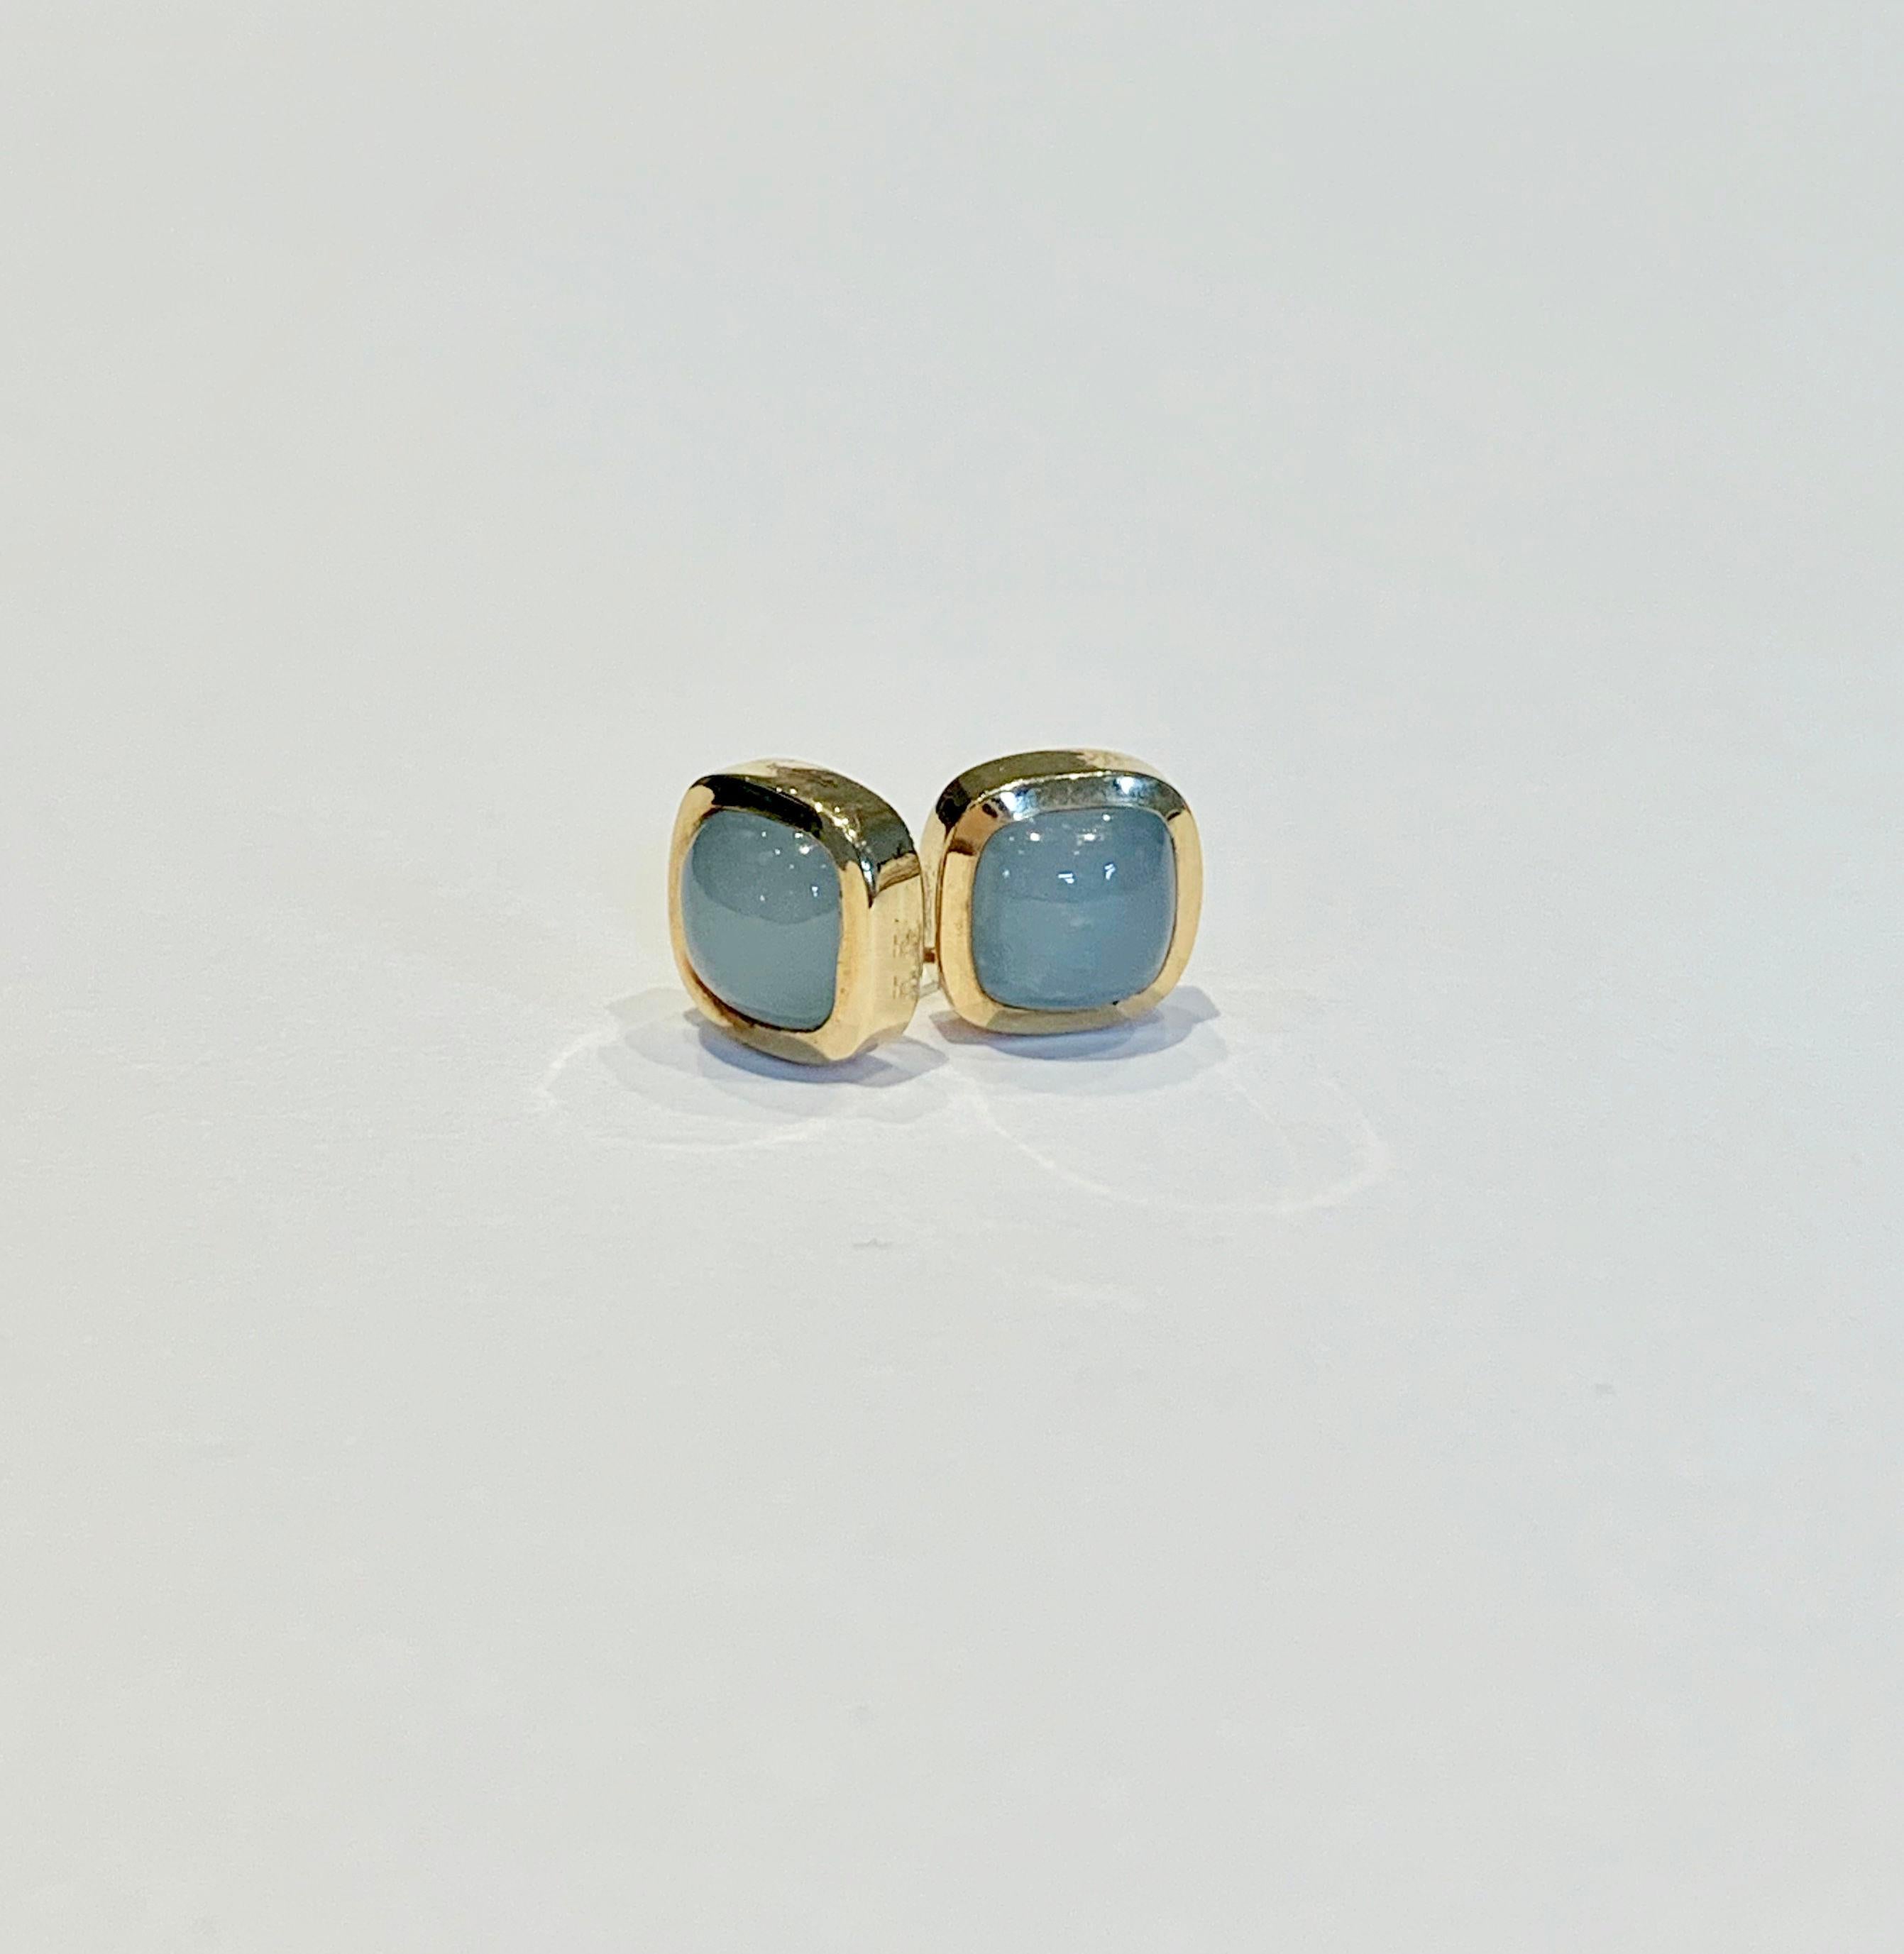 Bespoke Cushion Cut Cabochon Aquamarine Bezel Earrings in 18 Carat Yellow Gold In New Condition For Sale In Chislehurst, Kent